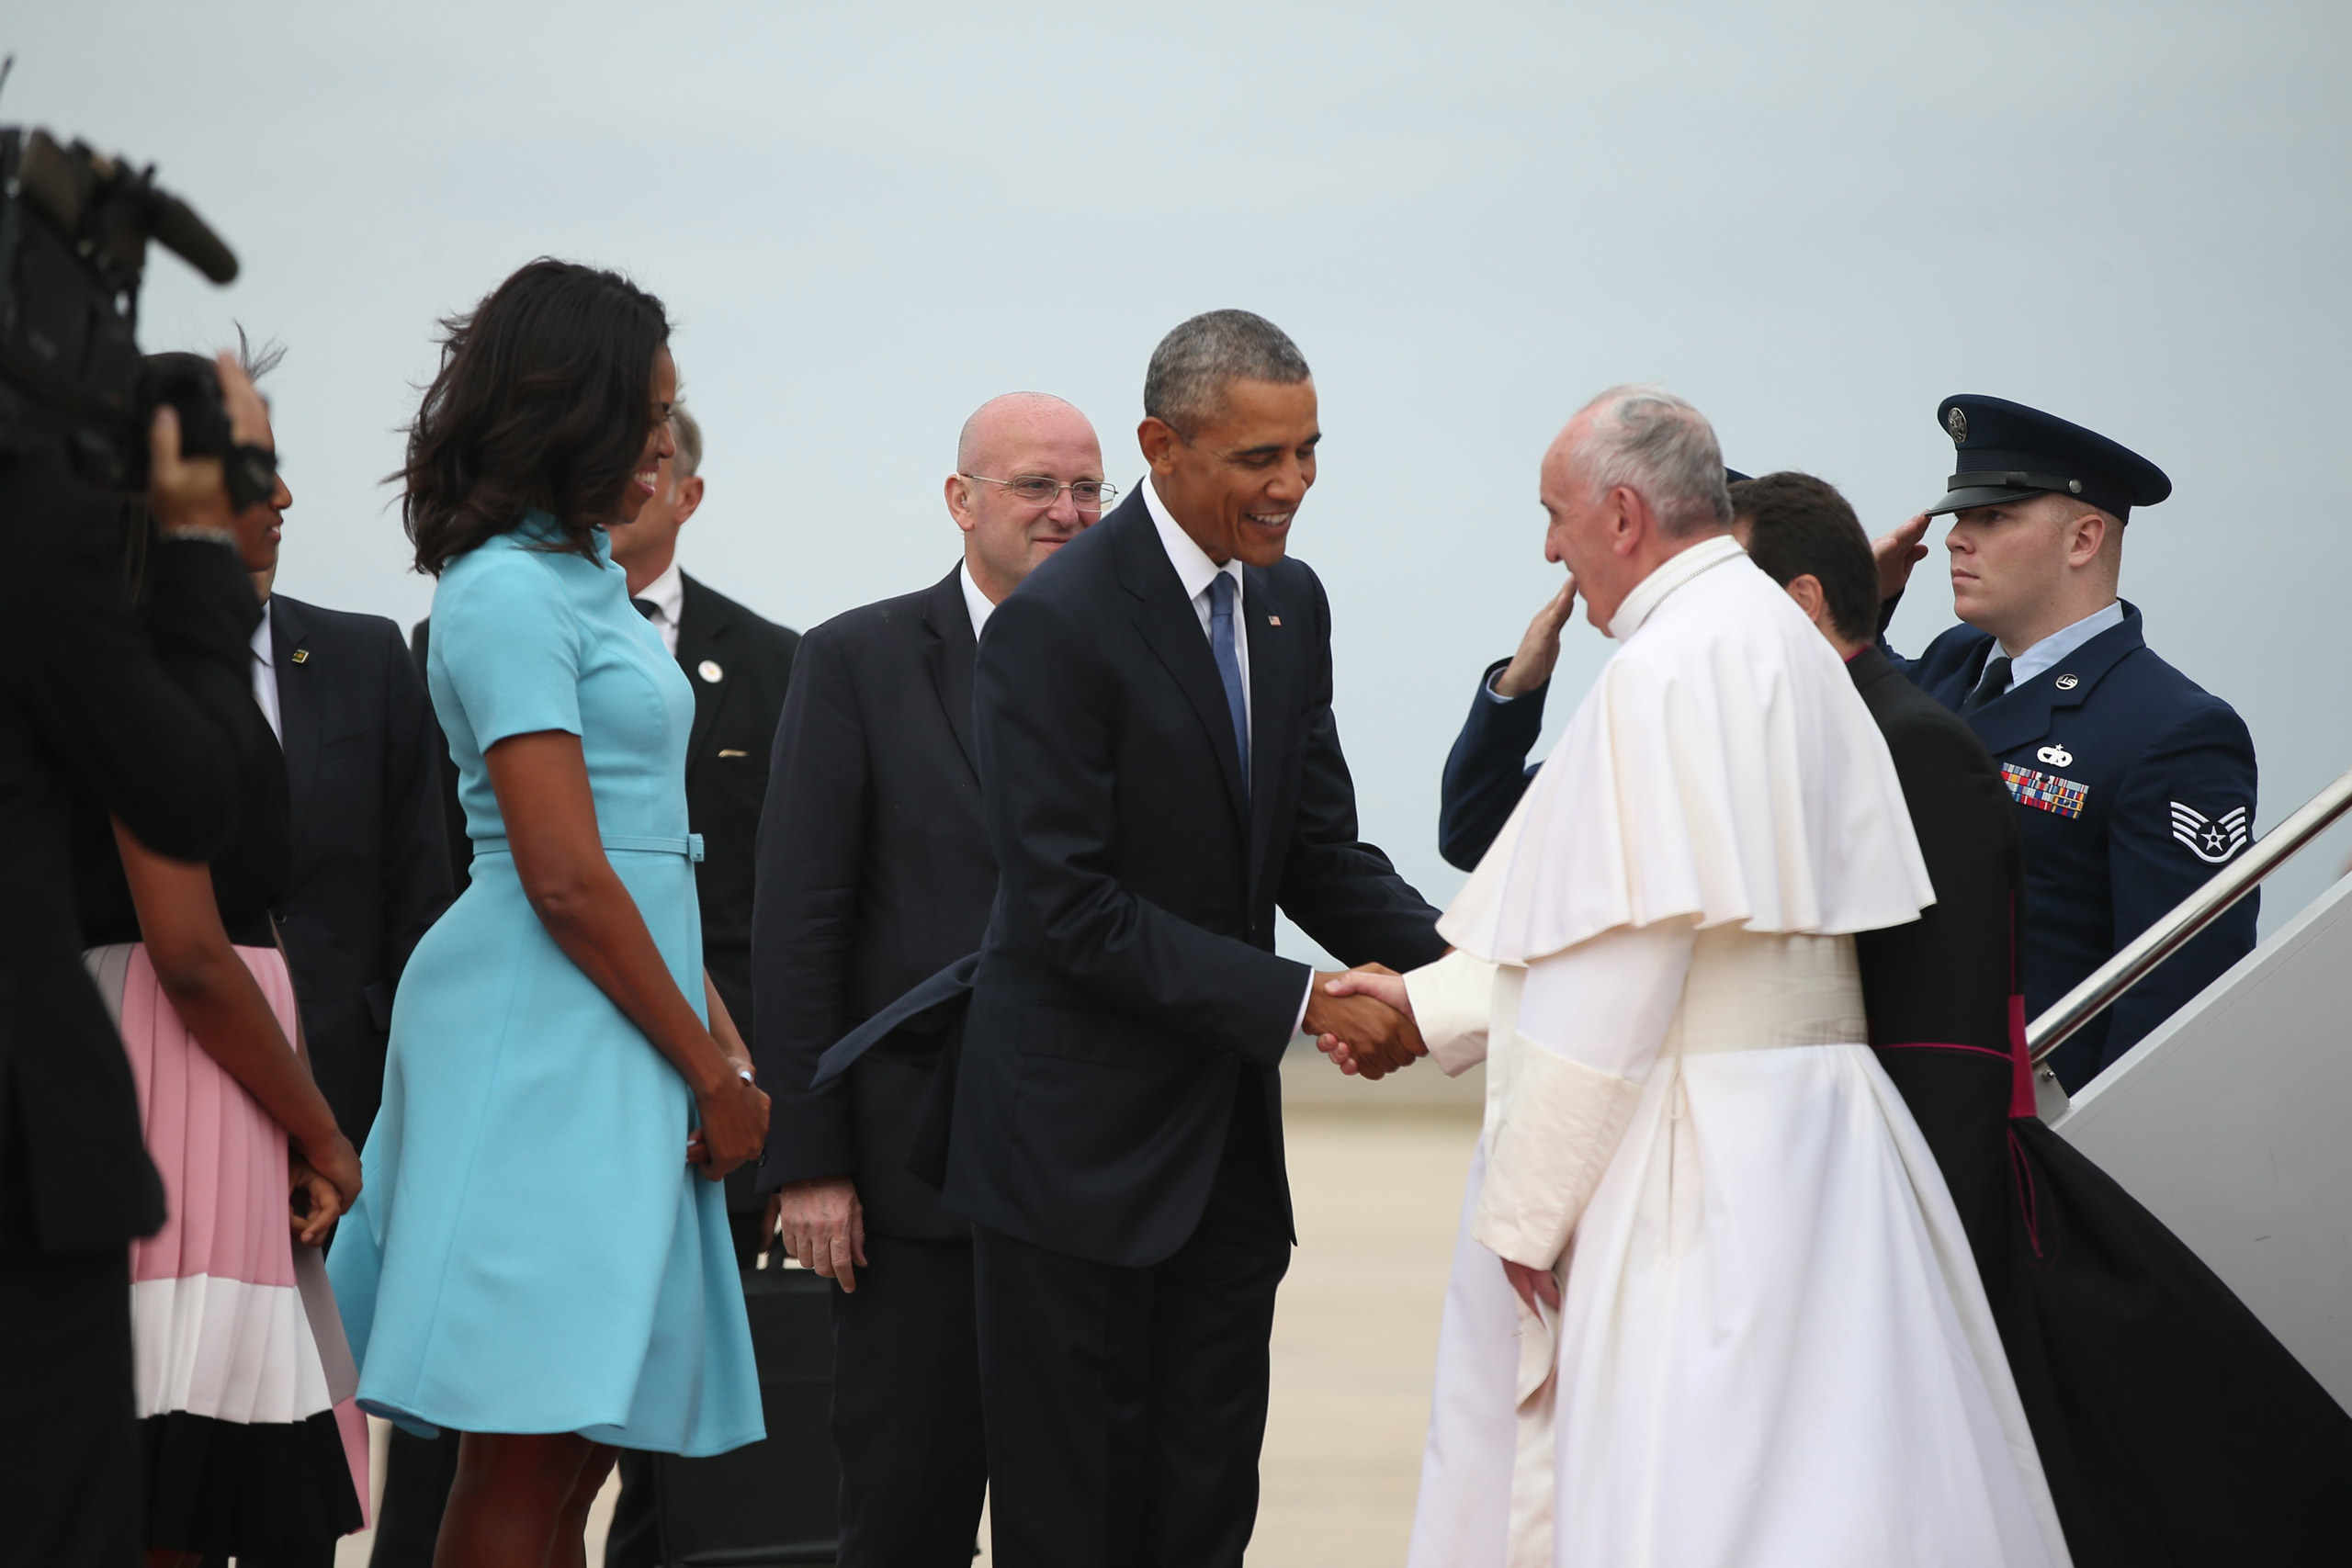 President Barack Obama and first lady Michelle Obama greet Pope Francis upon his arrival at Andrews Air Force Base, Md., on Sept. 22, 2015. (Andrew Harnik—AP)